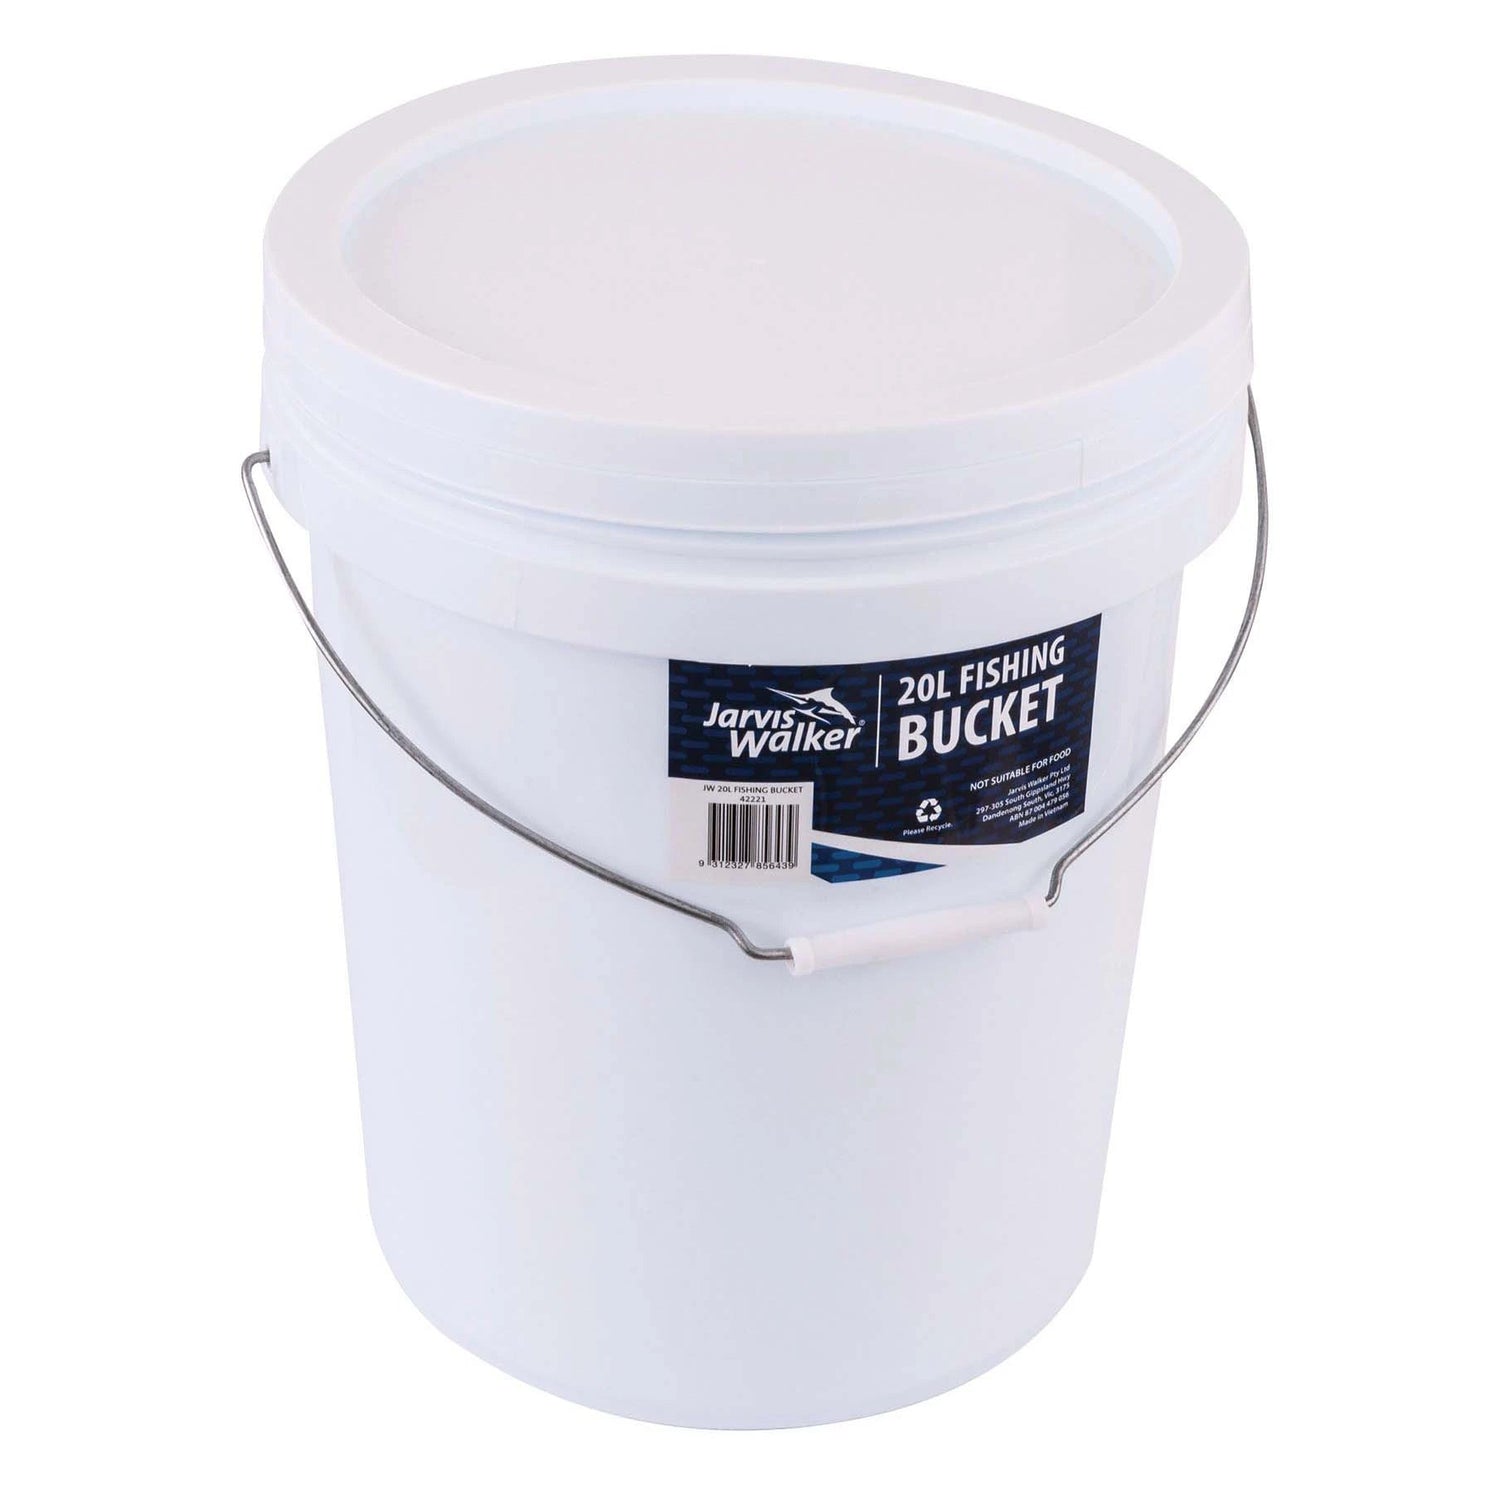 Jarvis Walker Fishing Bucket 20L-Bait Collecting & Burley-Jarvis Walker-Fishing Station